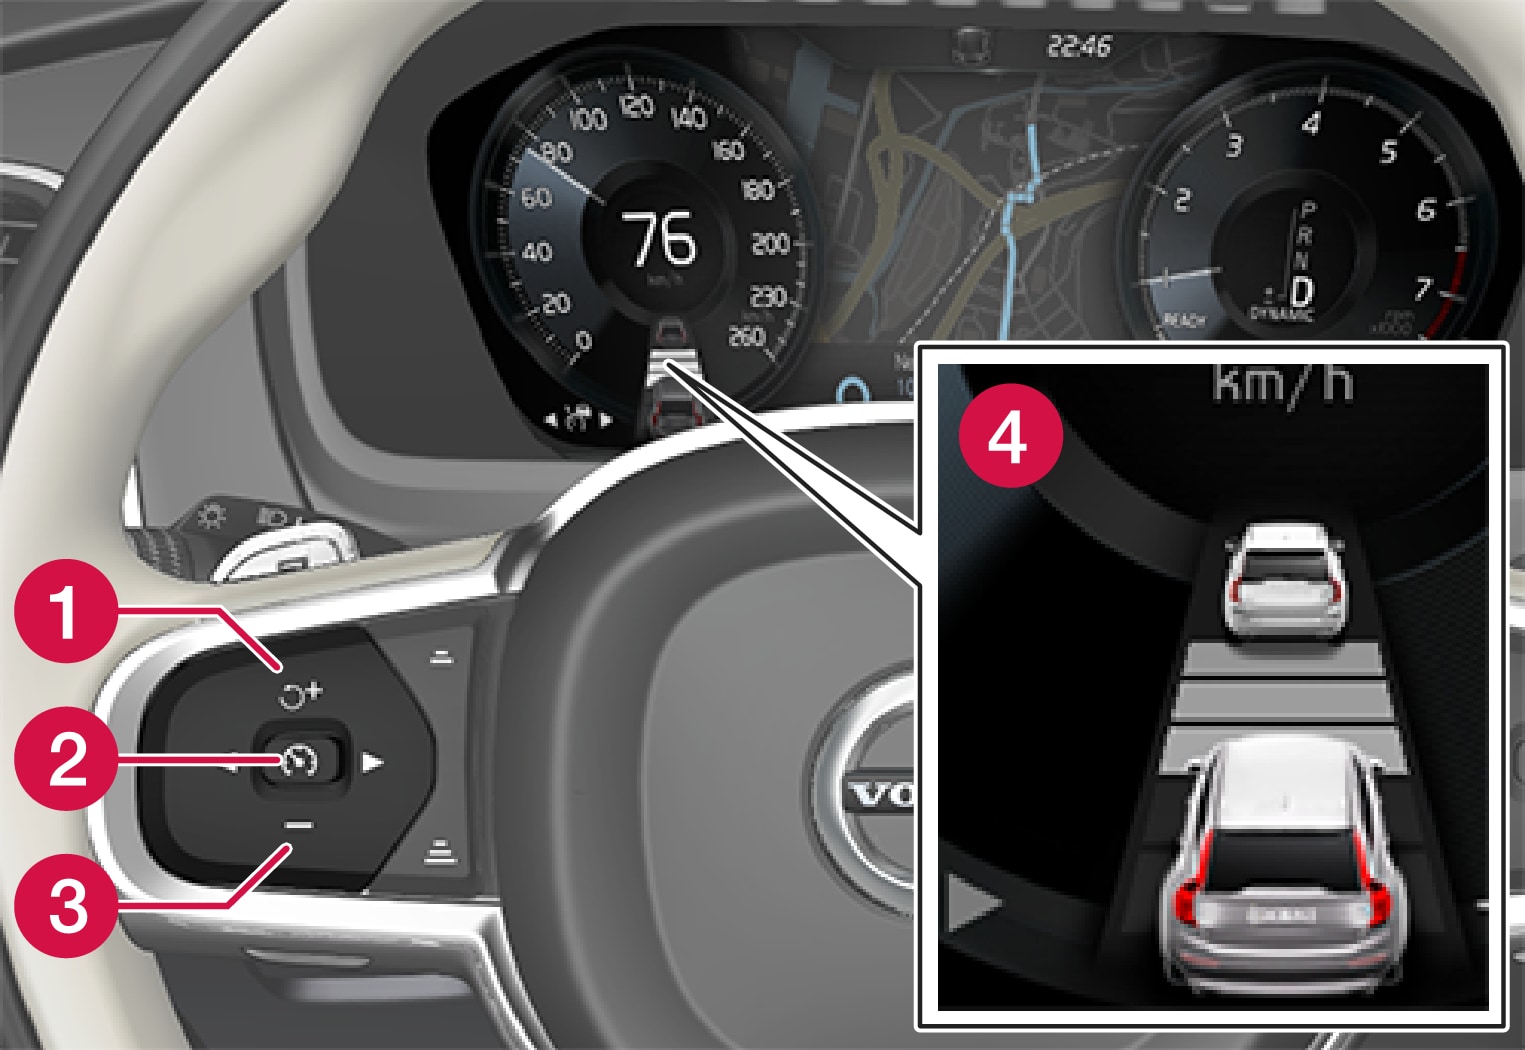 P5-1507-Adaptive Cruise Control, setting  cruise control in standby mode